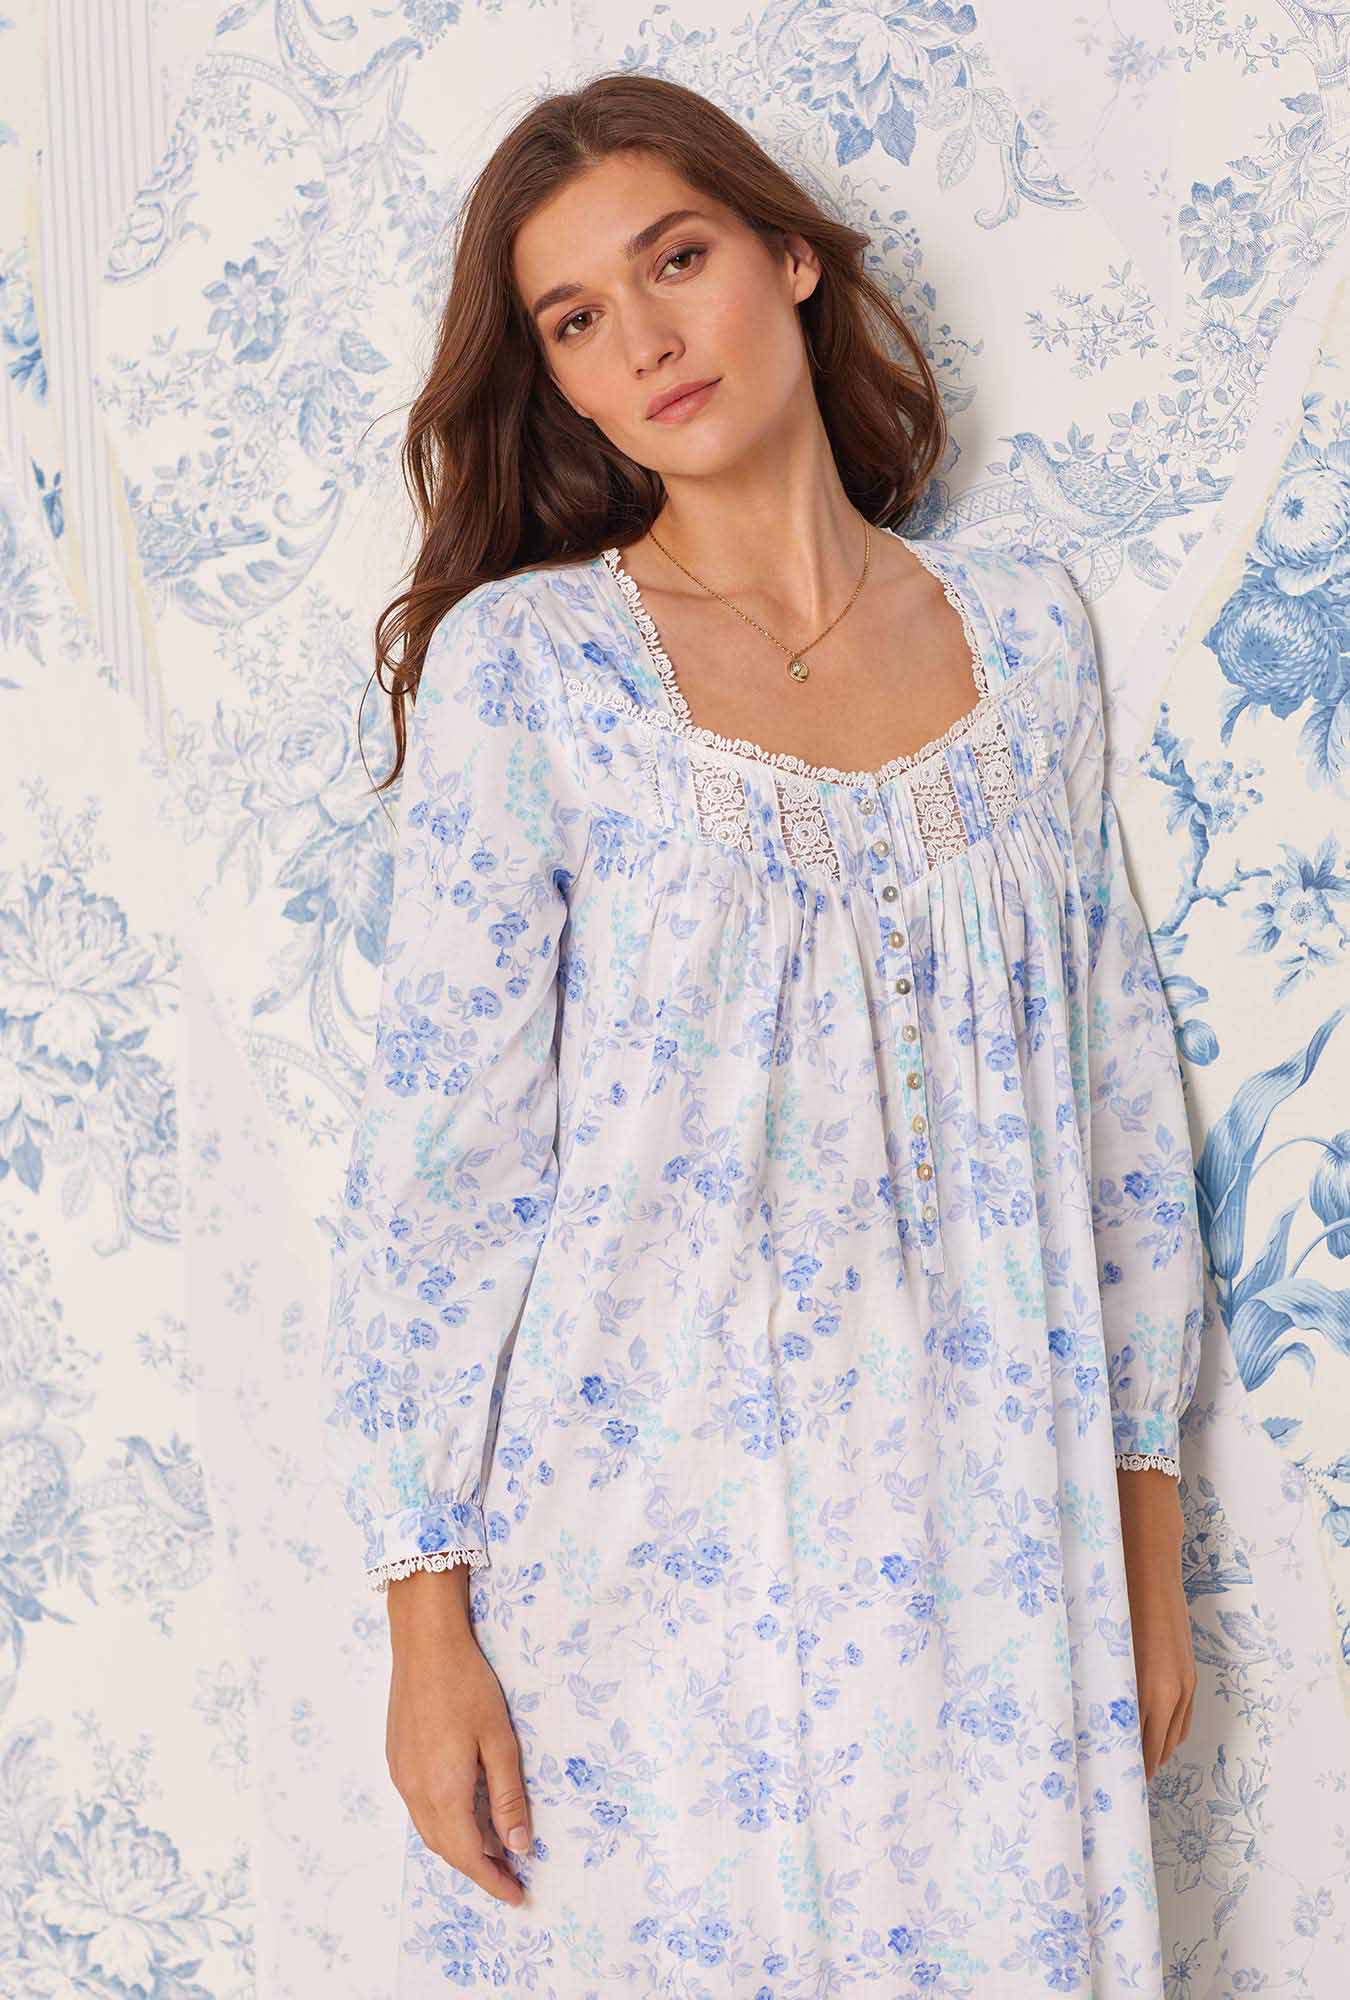 A lady wearing white nightgown with blue floral print